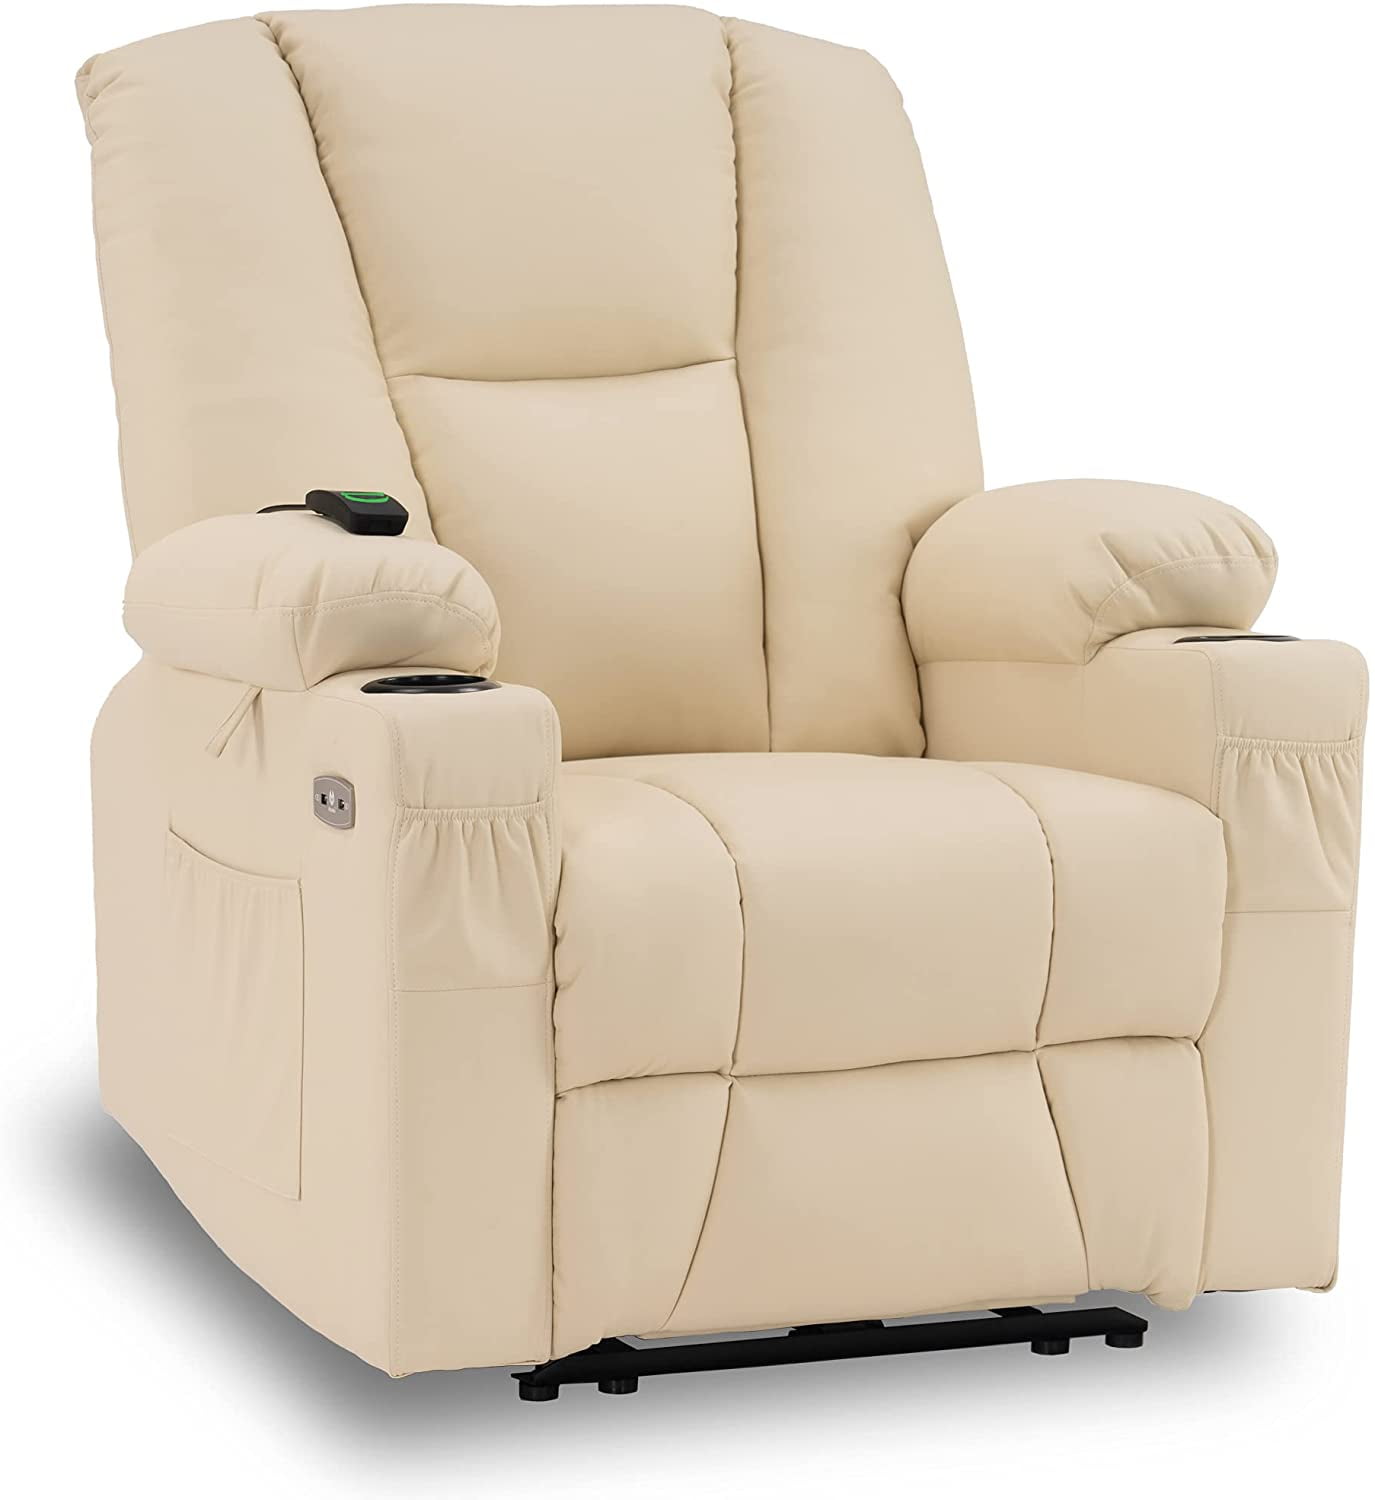 Mcombo Electric Power Recliner Chair With Massage And Heat Extended Footrest Usb Ports 2 Side